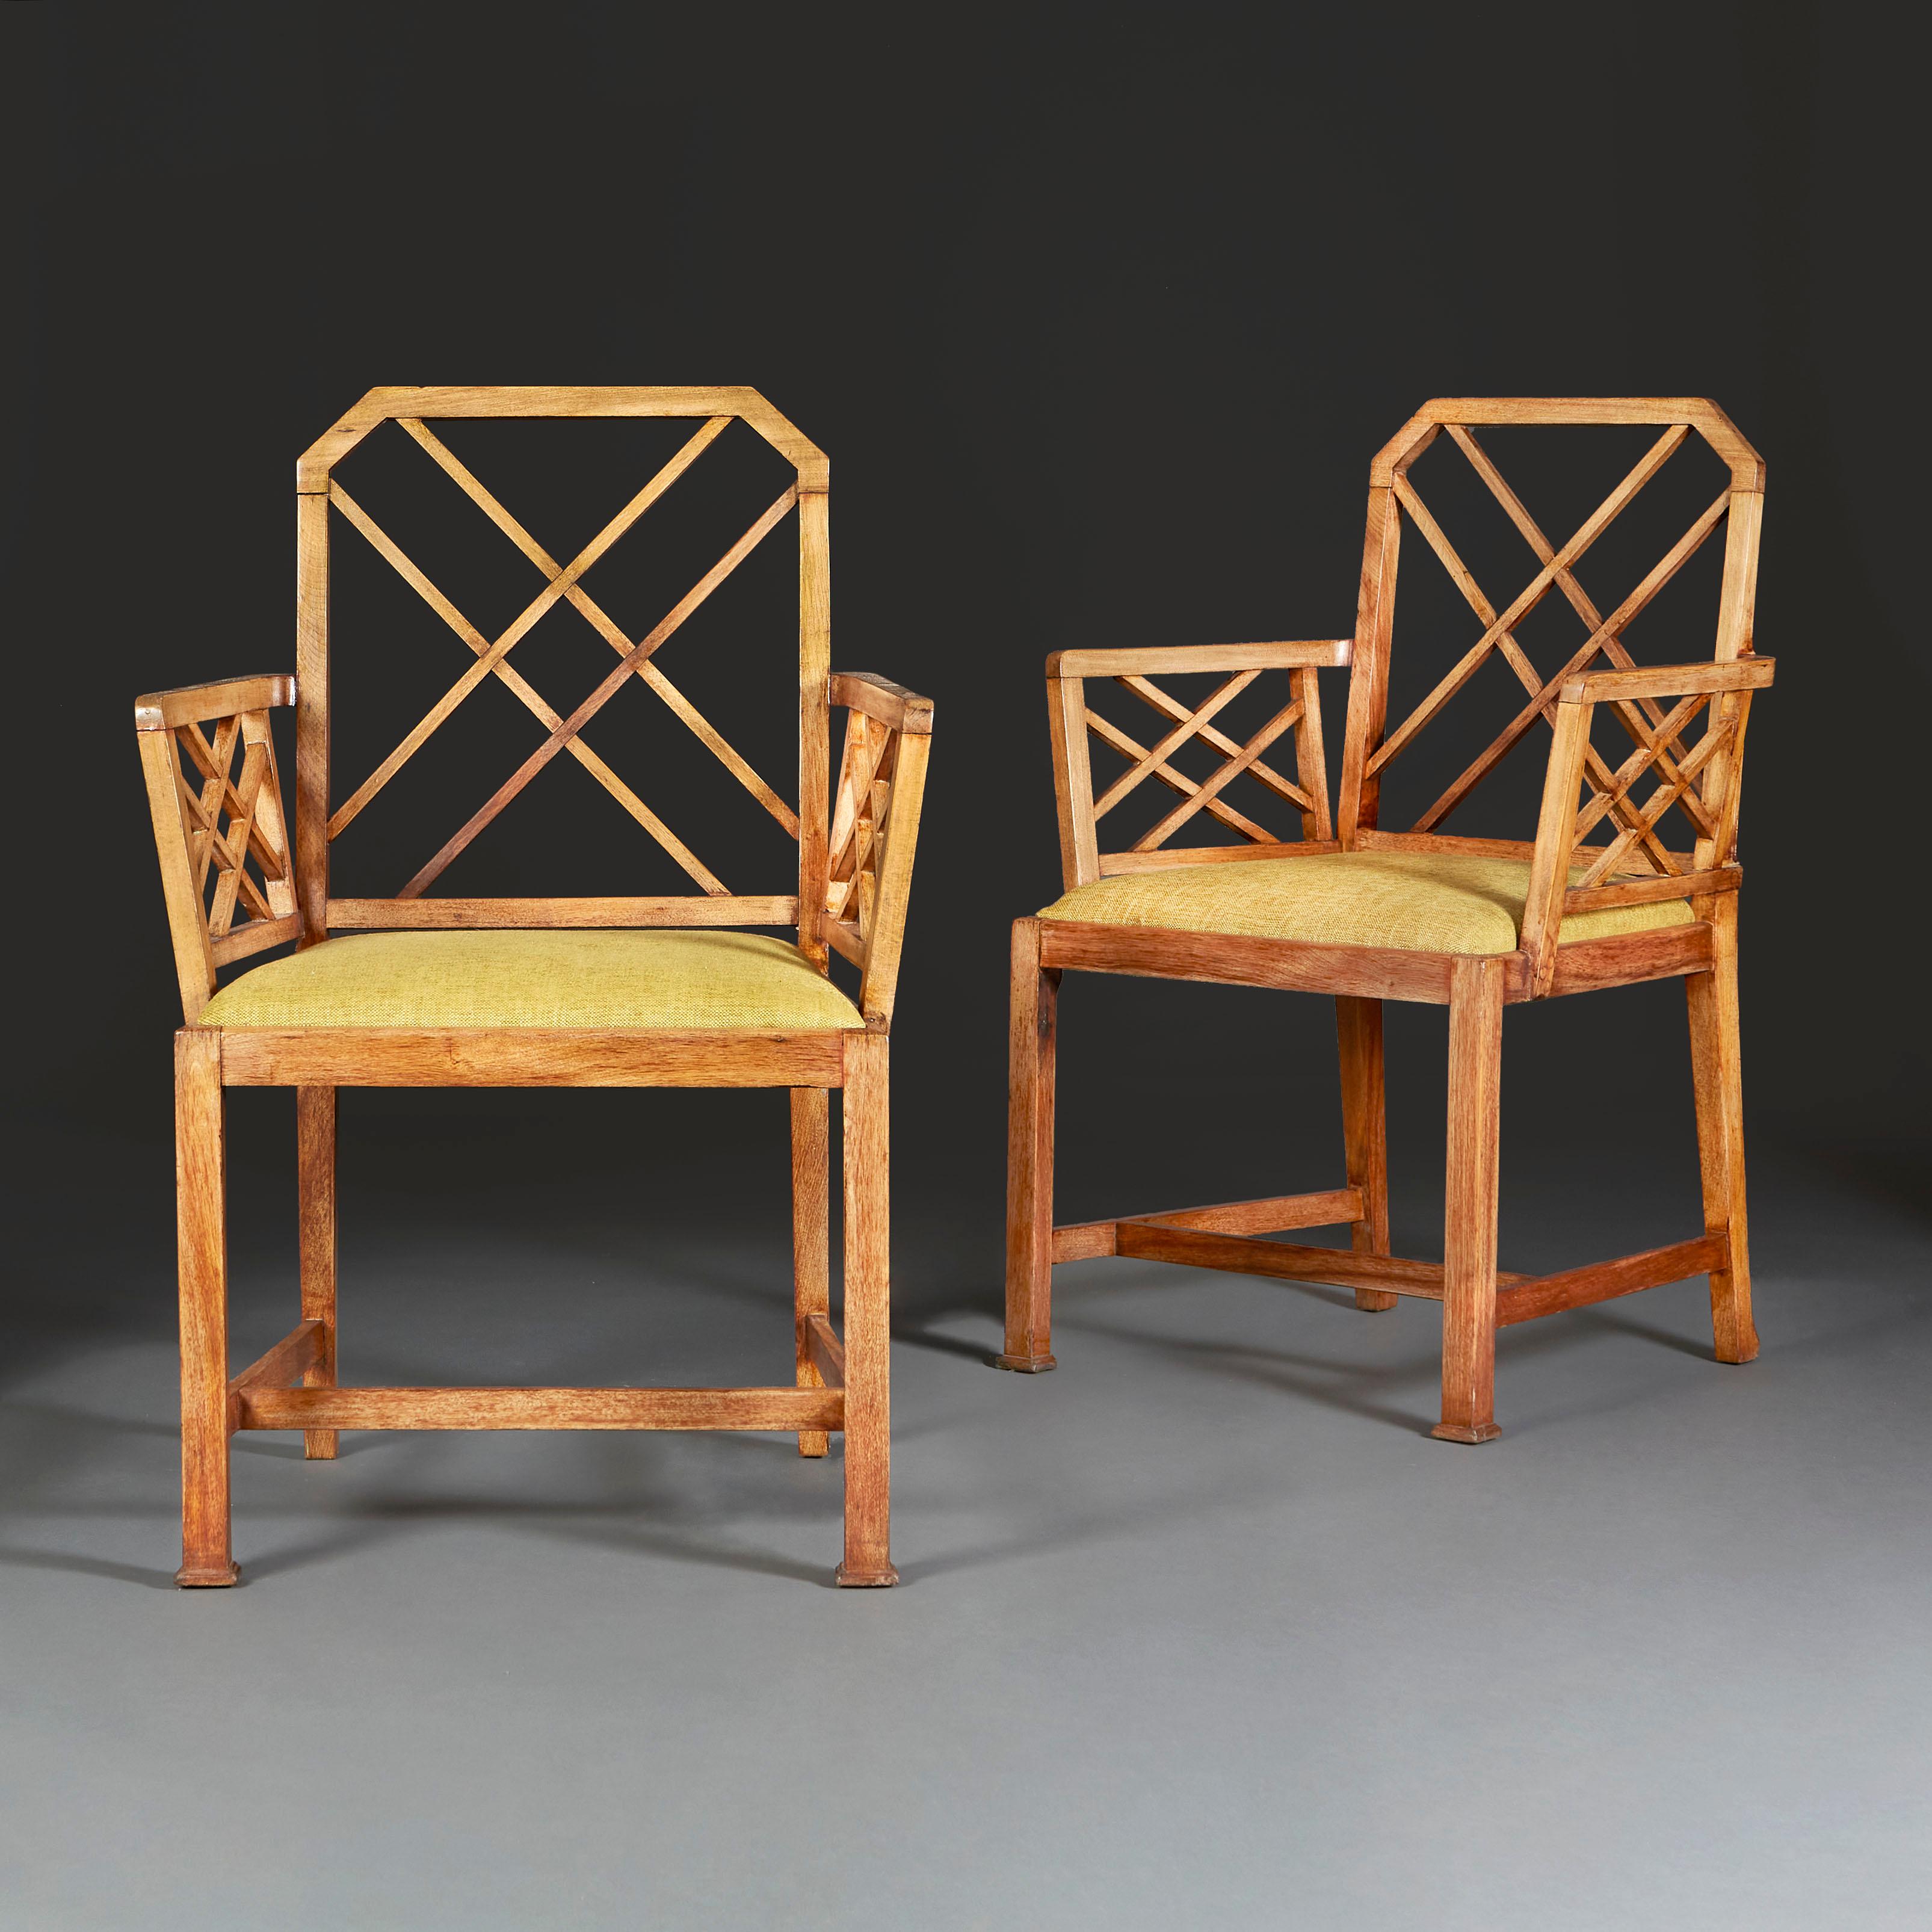 A pair of mid-twentieth century English oak cockpen armchairs with lattice backs and arms, the seats now upholstered in green linen.